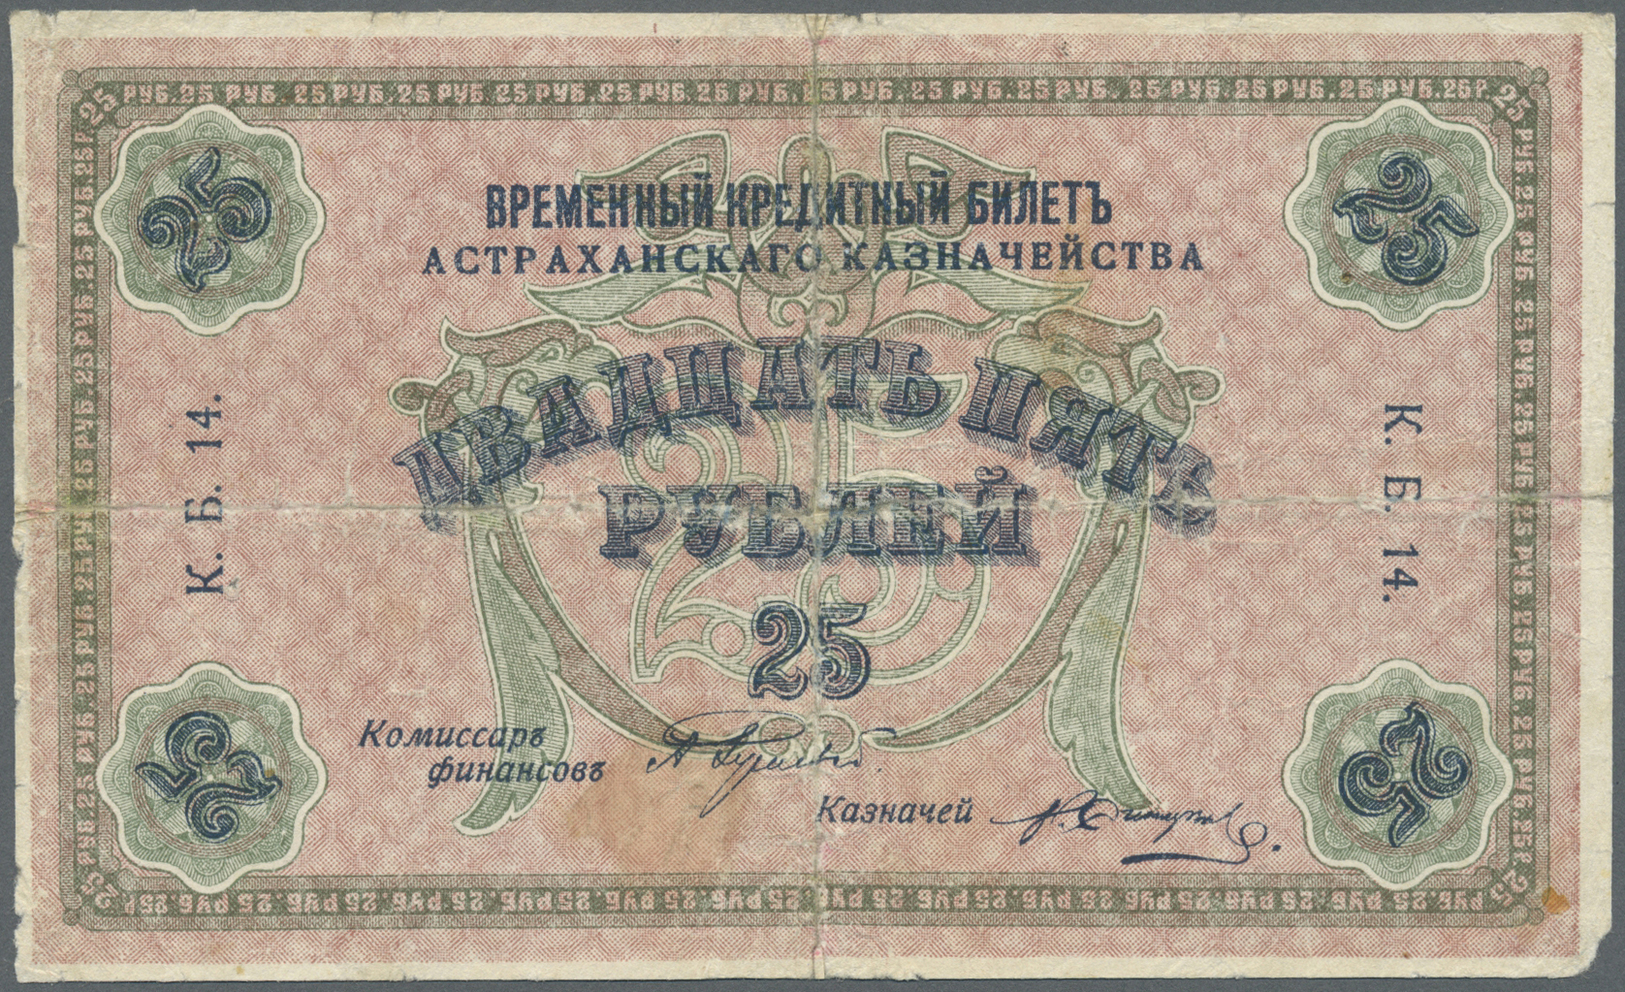 02296 Russia / Russland: South Russia, Astrakhan Treasury, 25 Rubles 1918, P.S445 In Used/well Worn Condition With Taped - Russia